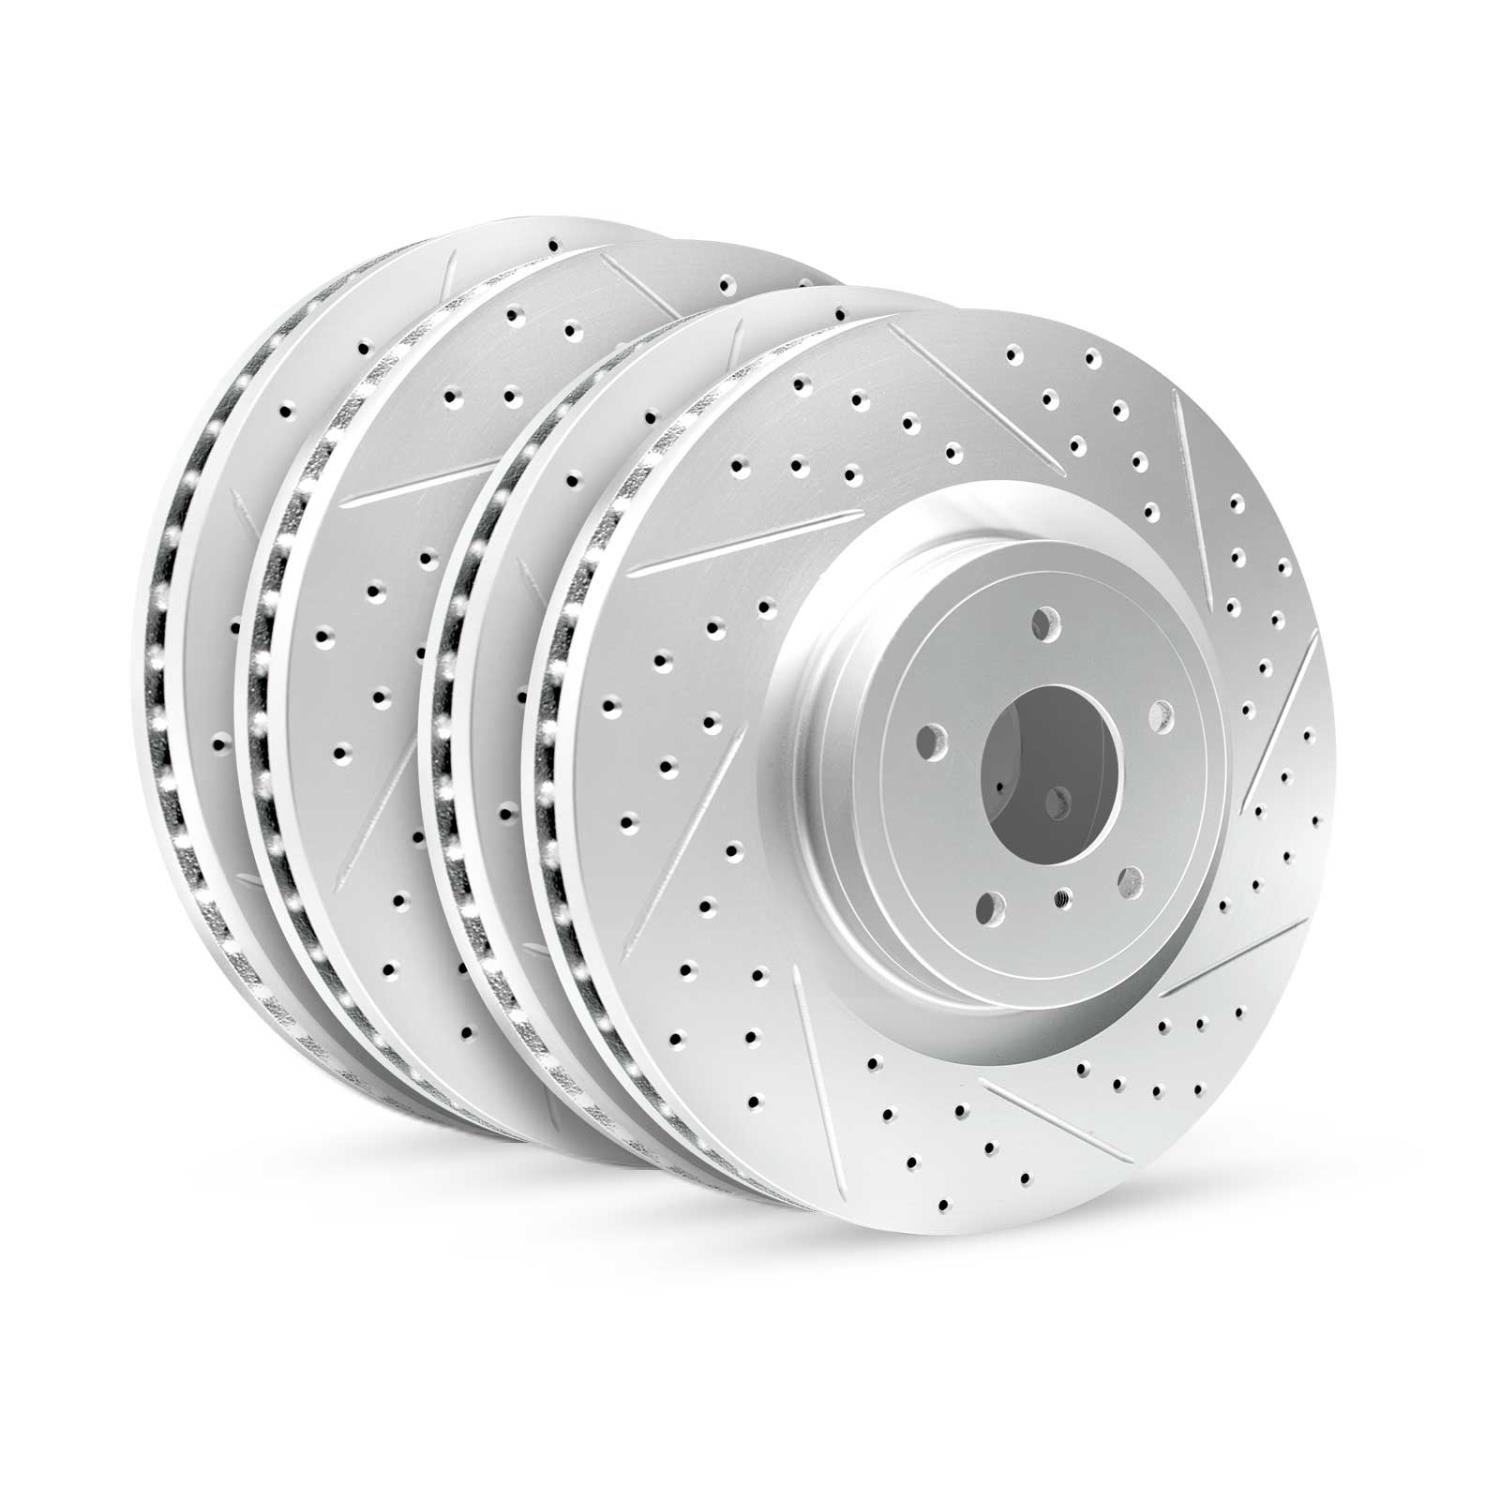 GEO-Carbon Drilled/Slotted Rotors, 1996-1998 BMW, Position: Front/Rear